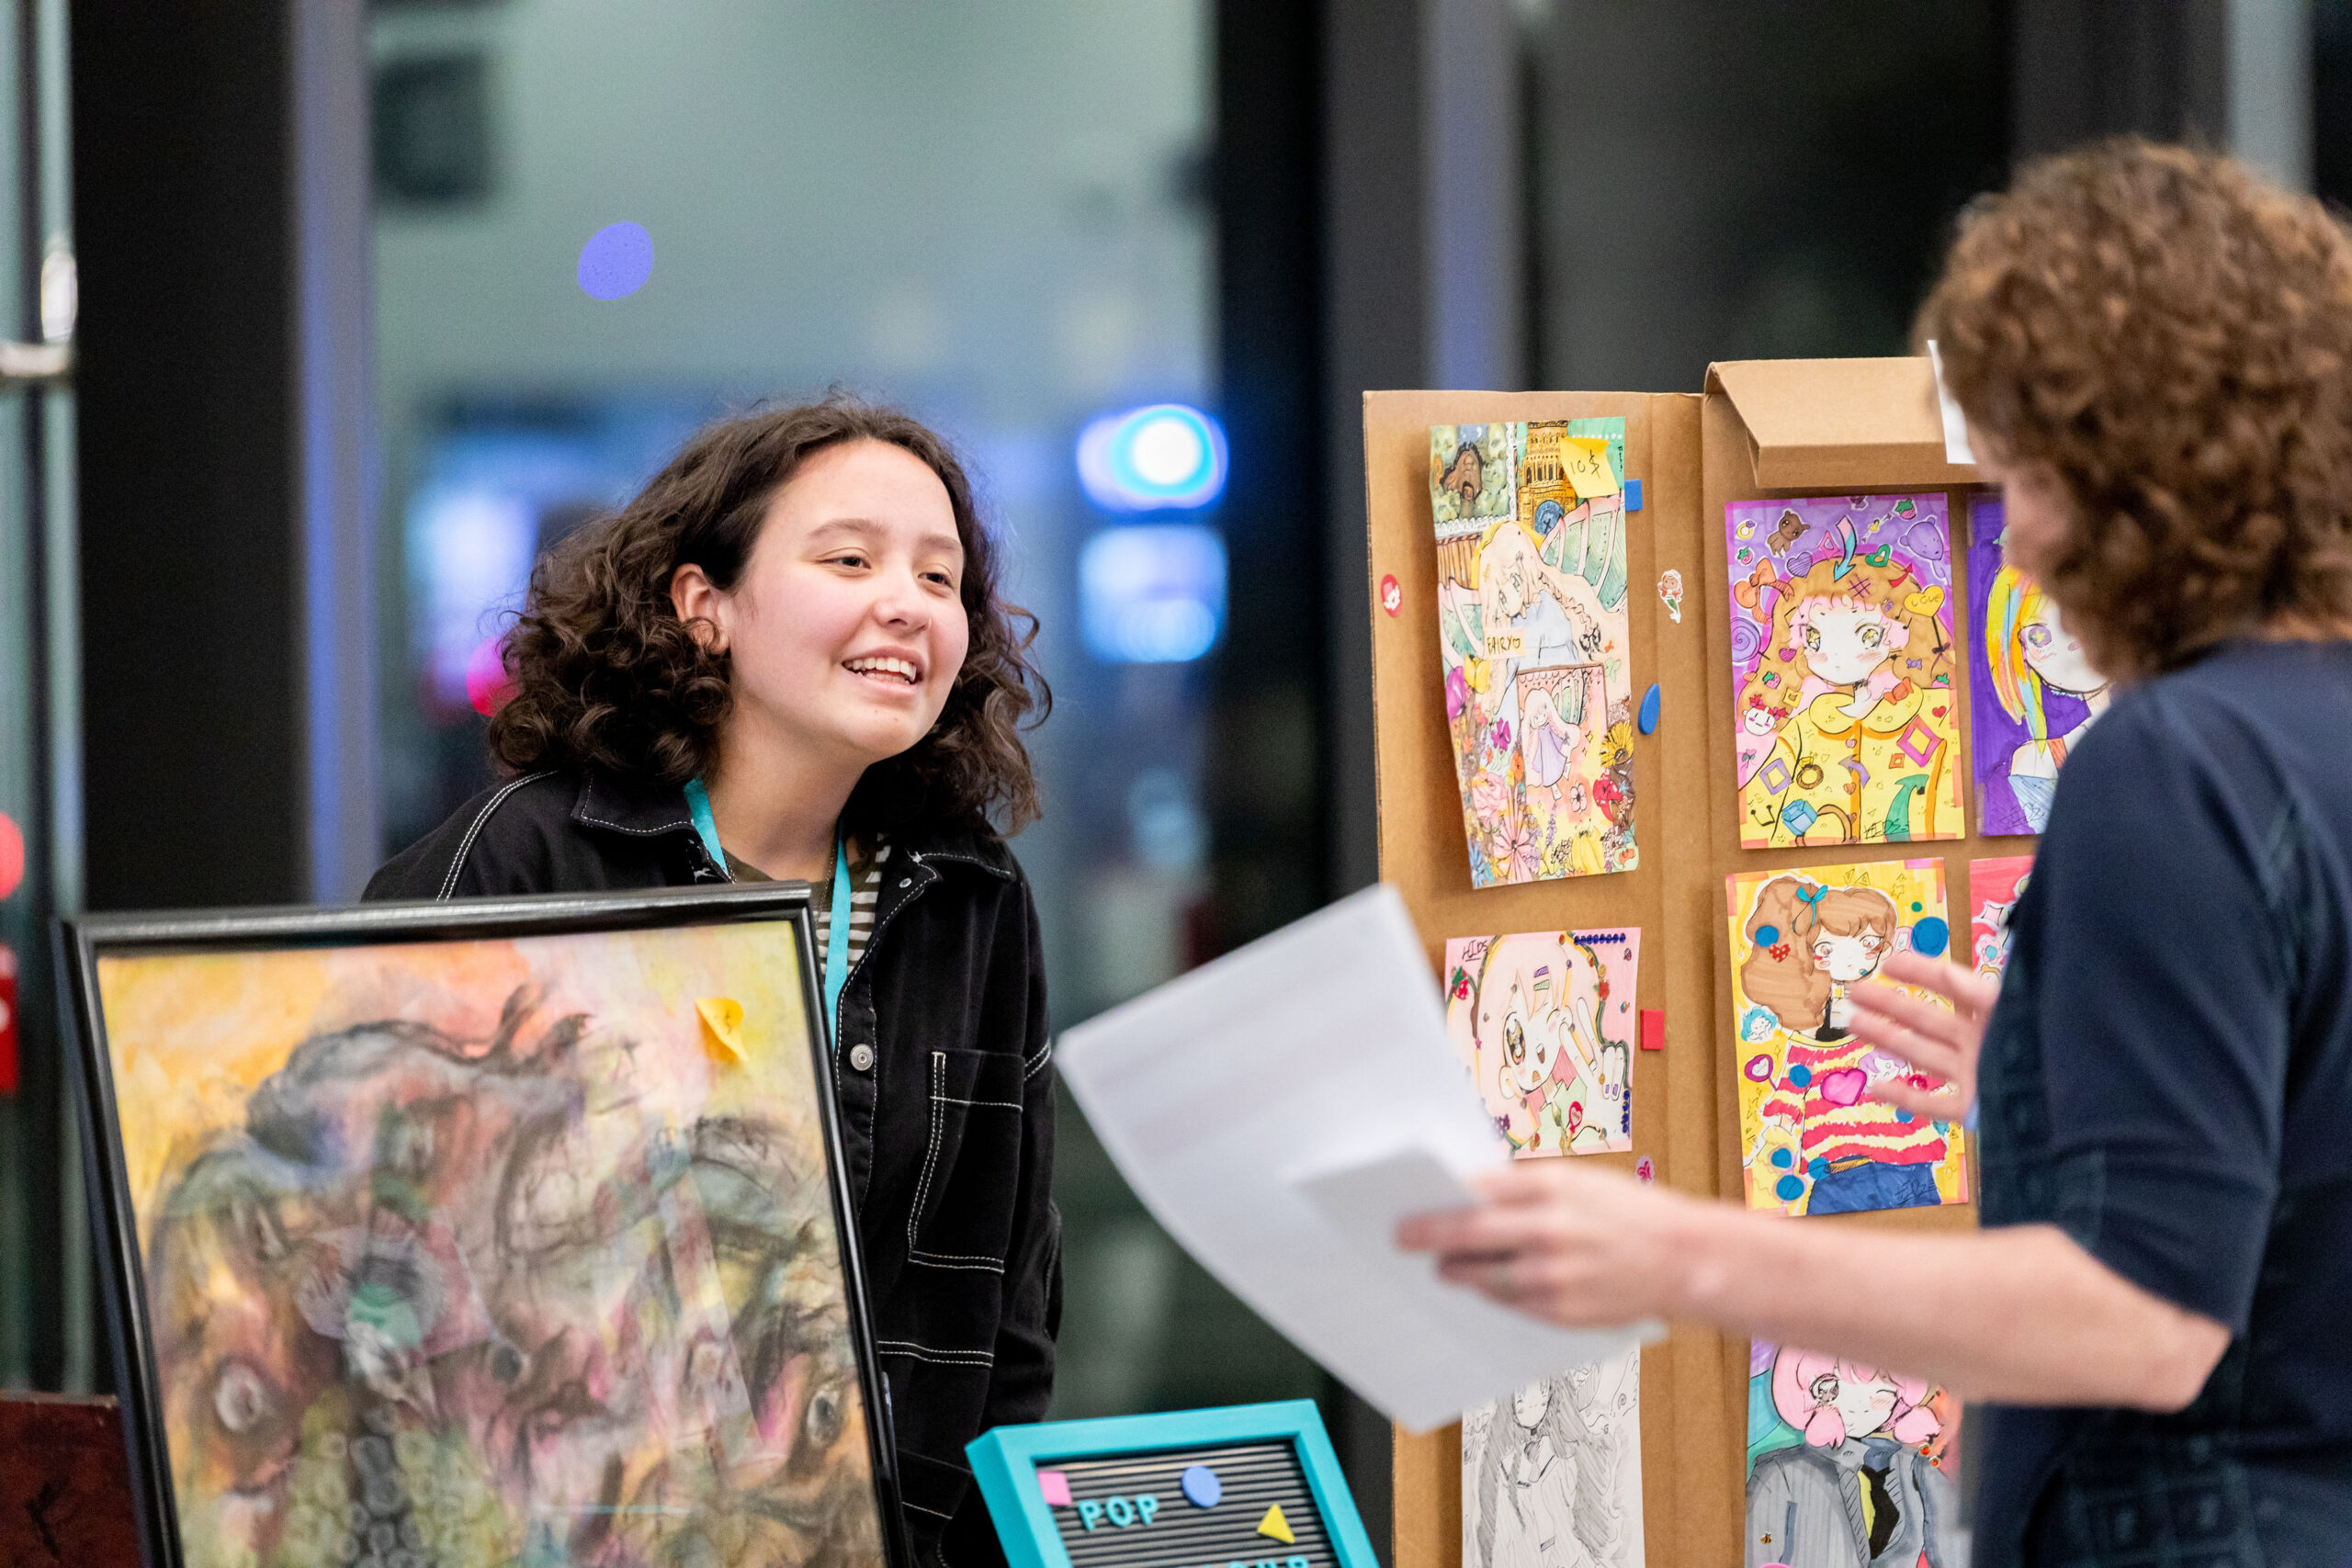 A young person stands behind a booth full of artwork. They are smiling at another person across the booth.